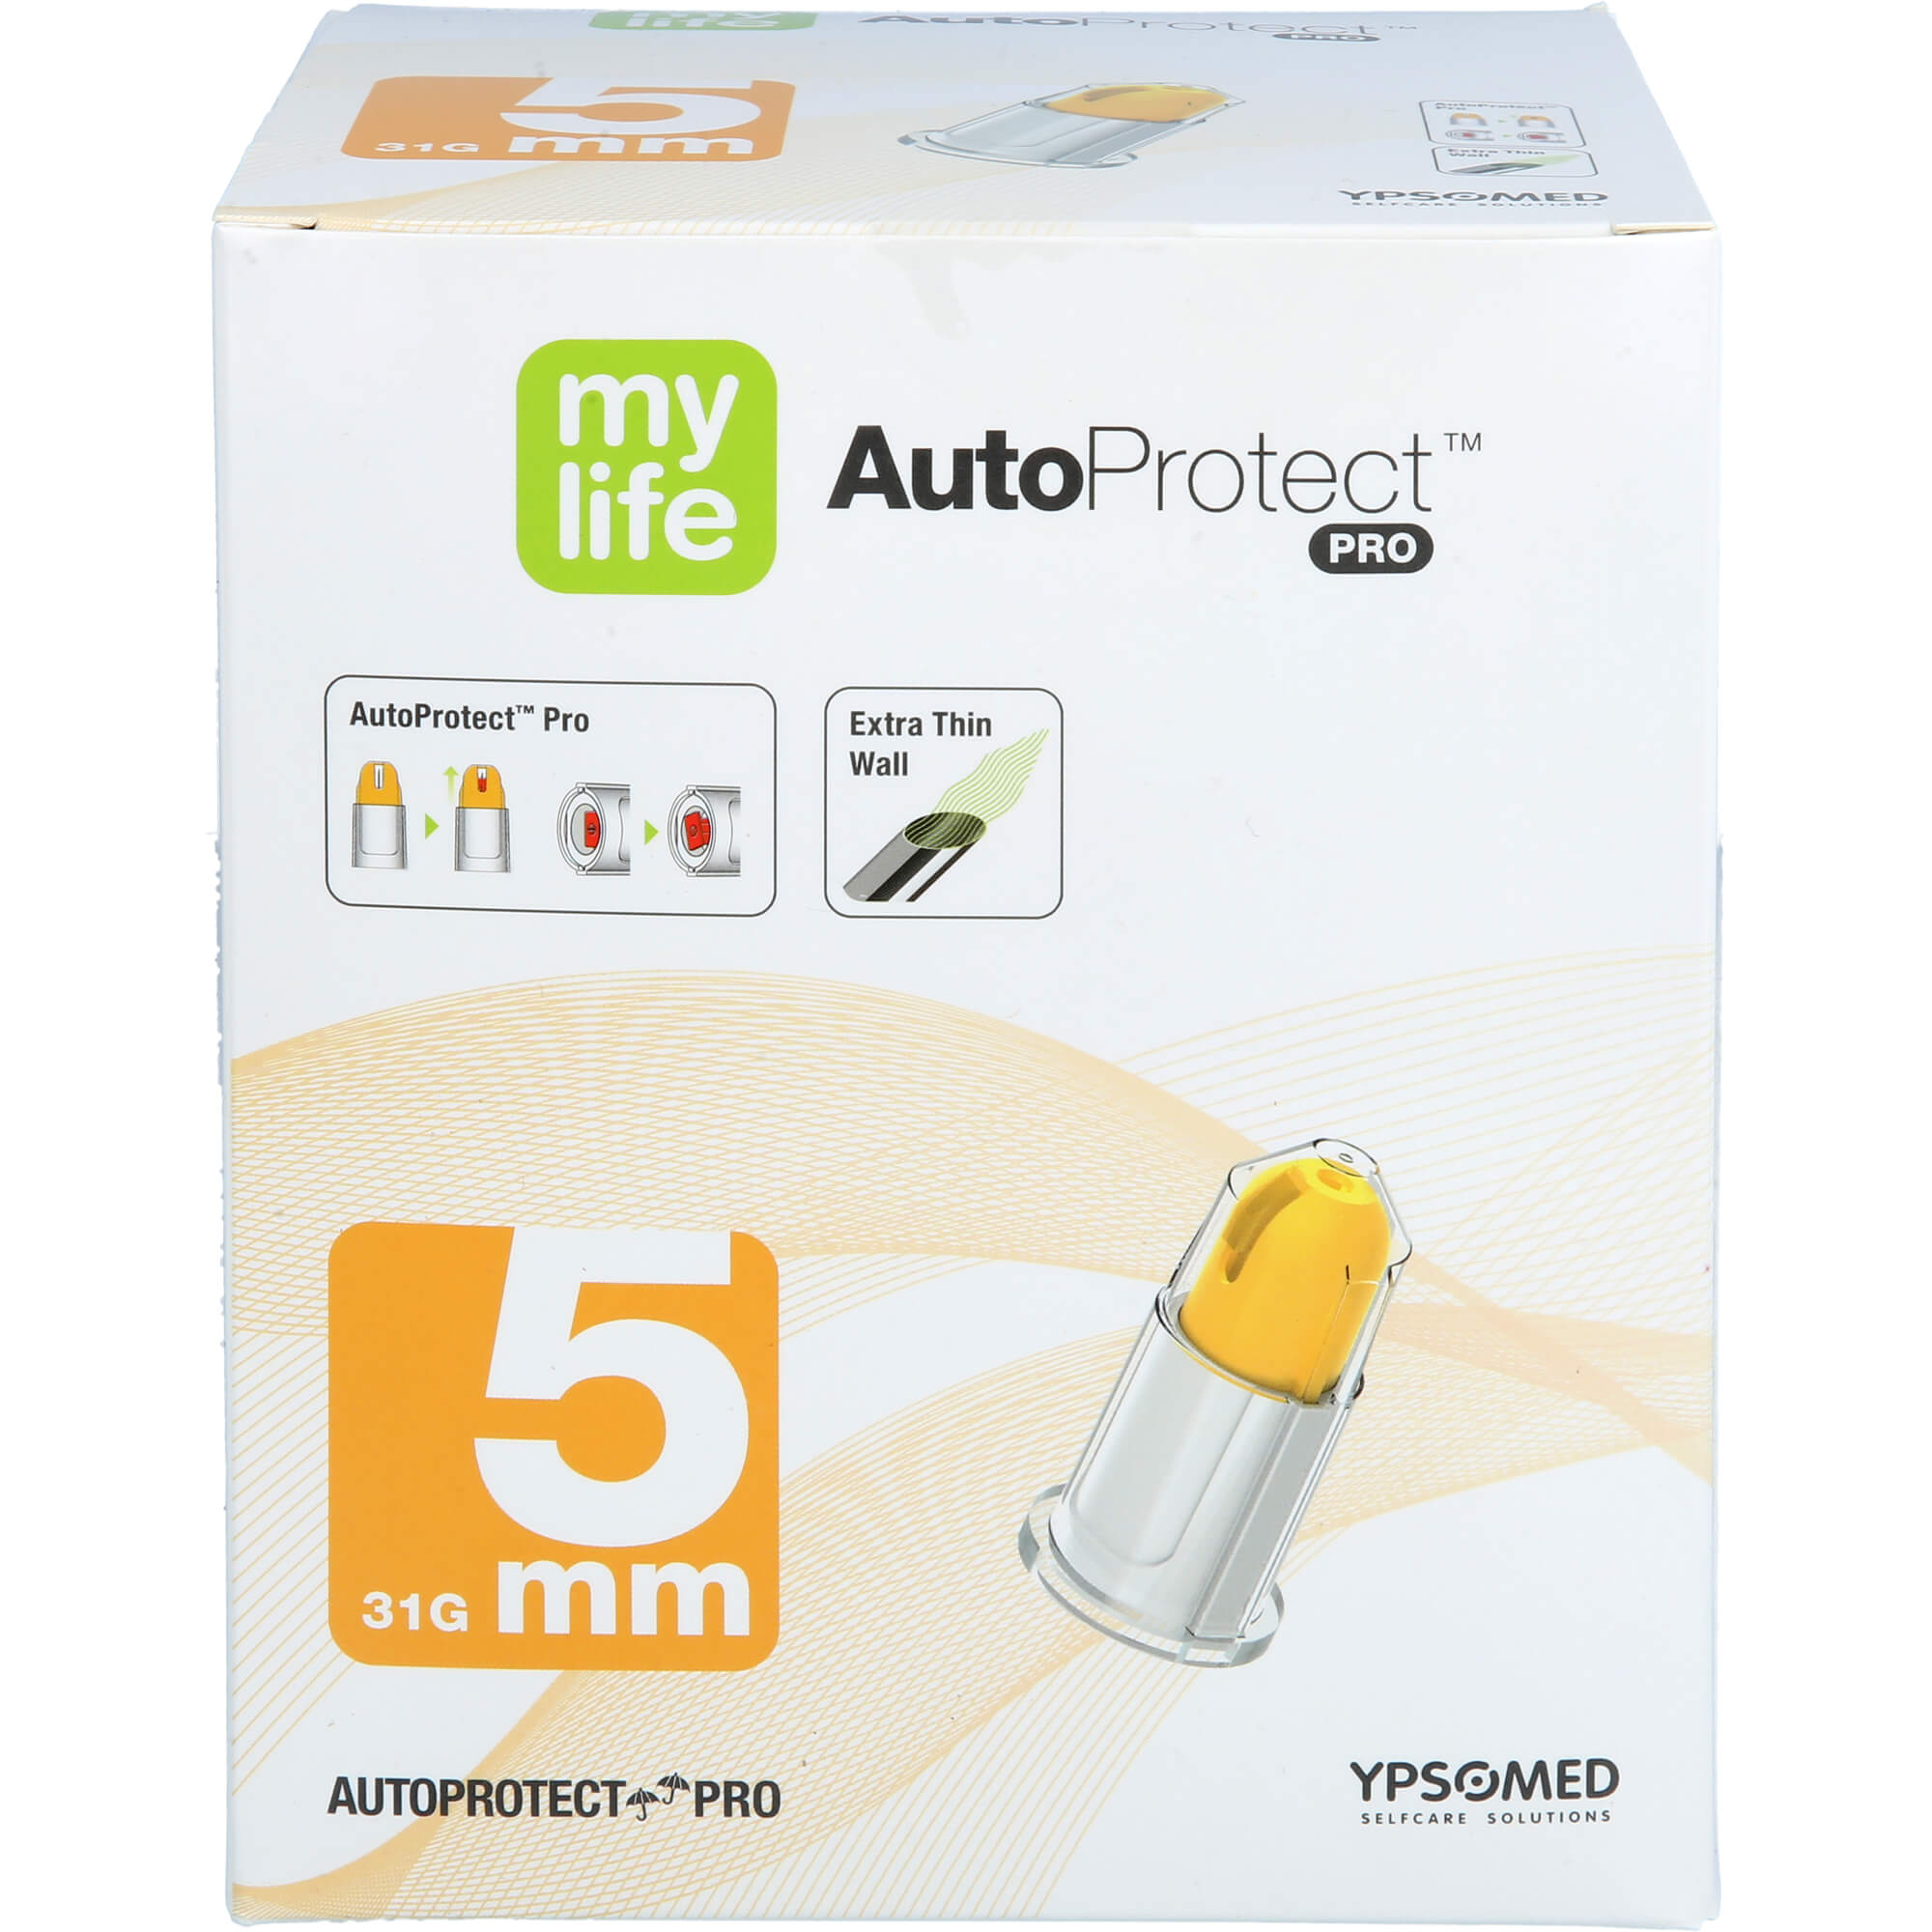 MYLIFE AutoProtect PRO Sich.-Pen-Nadeln 5 mm 31 G